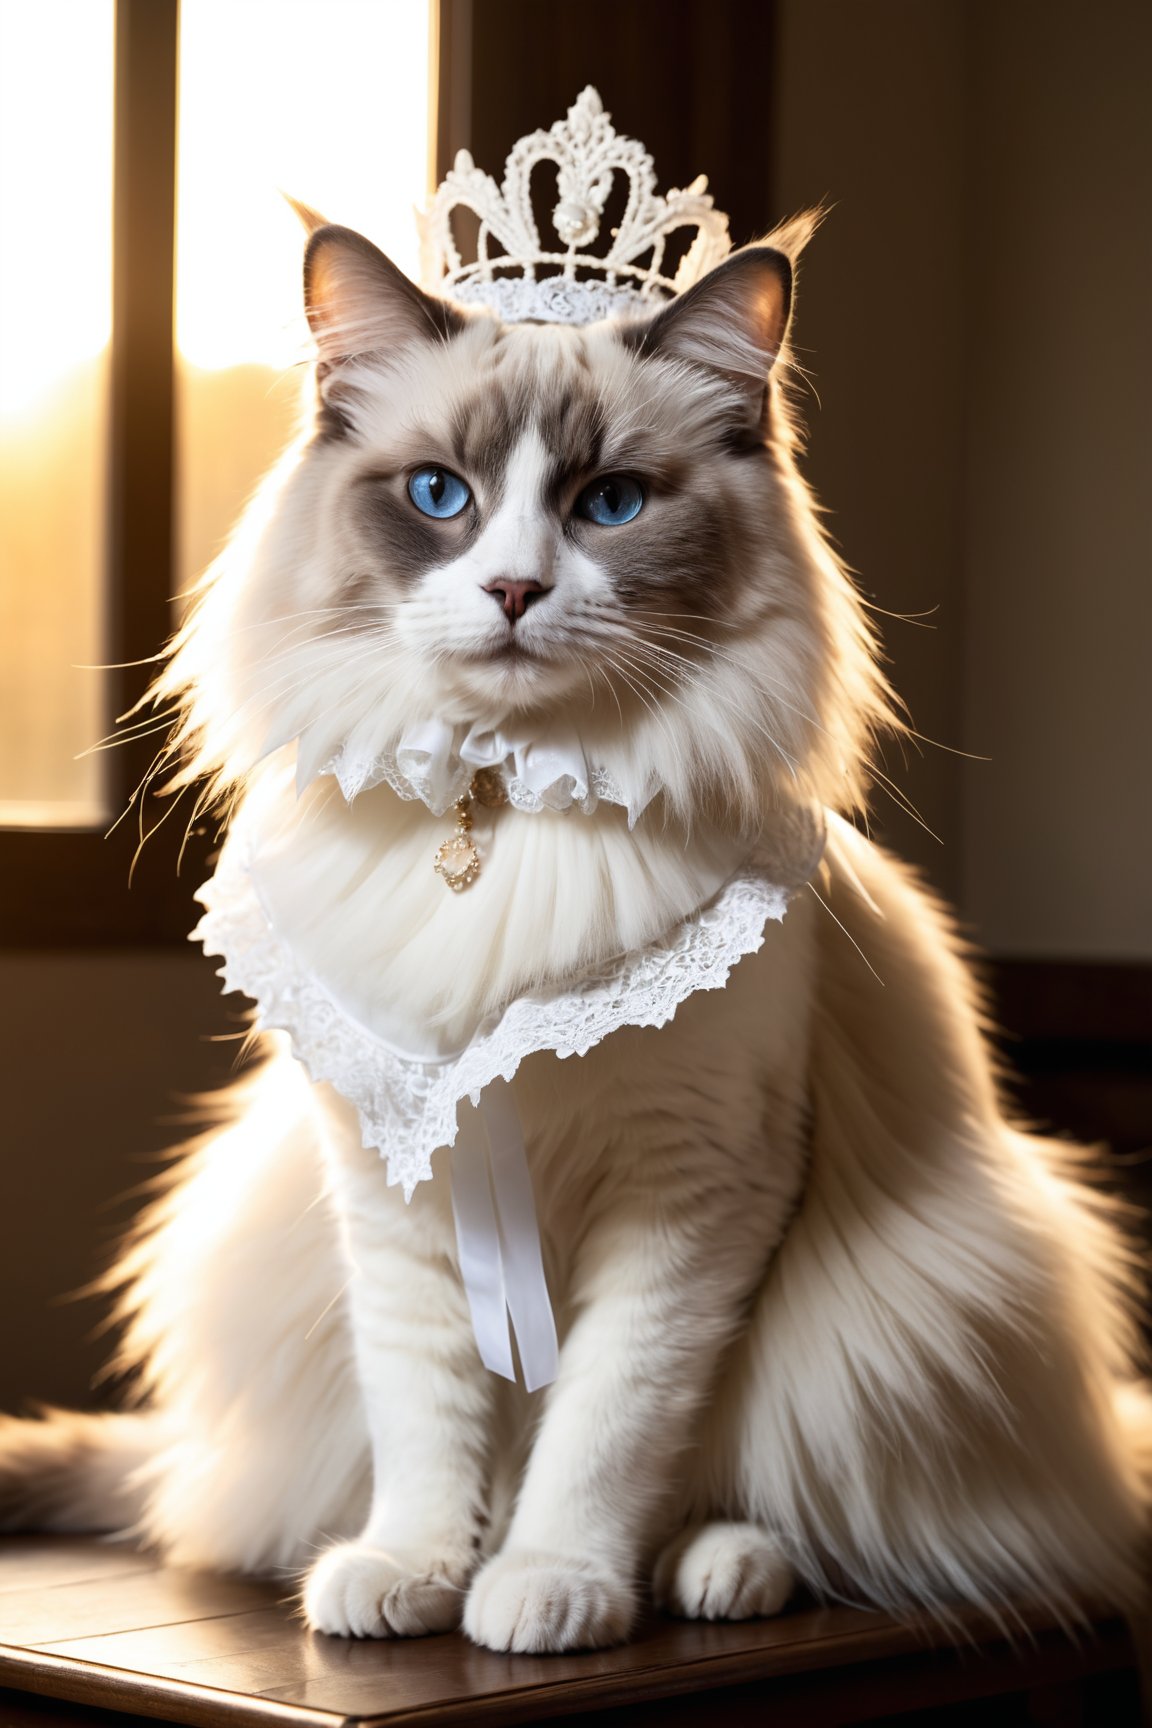 A Ragdoll cat wearing,Colorpoint Ragdoll,maid lace headdress,highly detailed, photorealistic, vibrant, immersive, fantasy setting,indoors,natural light,well-lit,dusk,Vintage filter